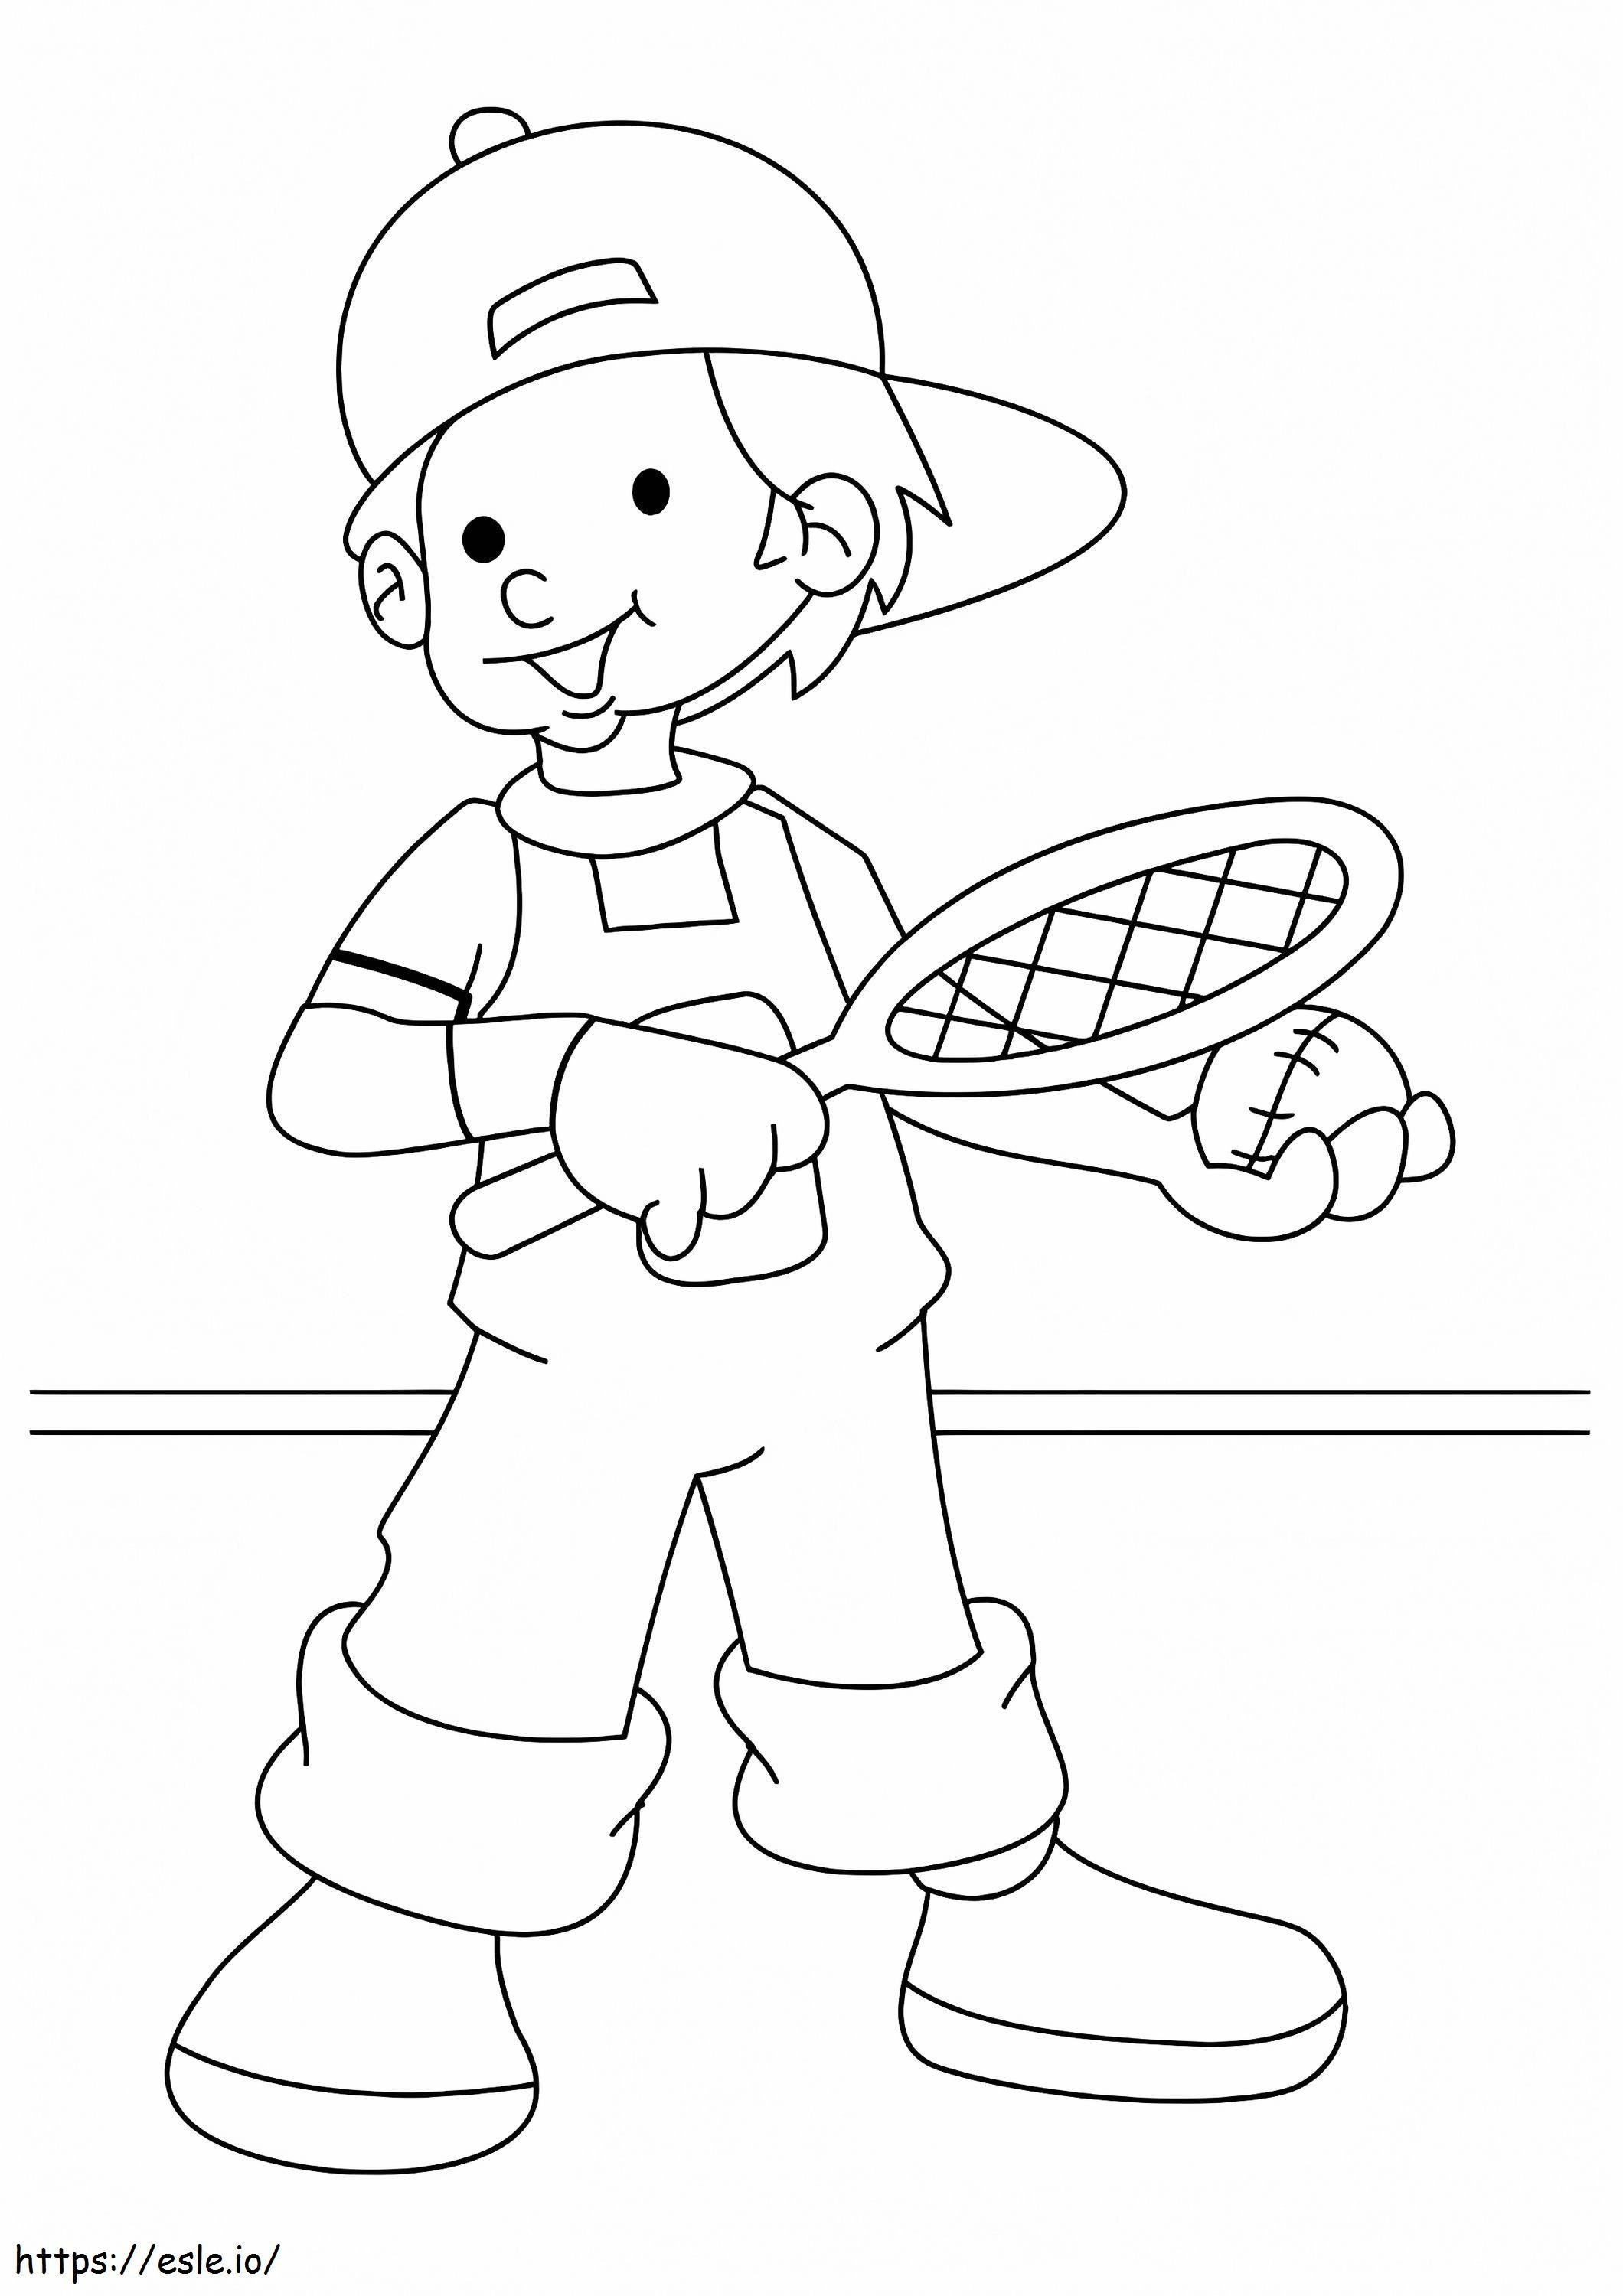 1526205895 The Boy Playing Tennis A4 coloring page